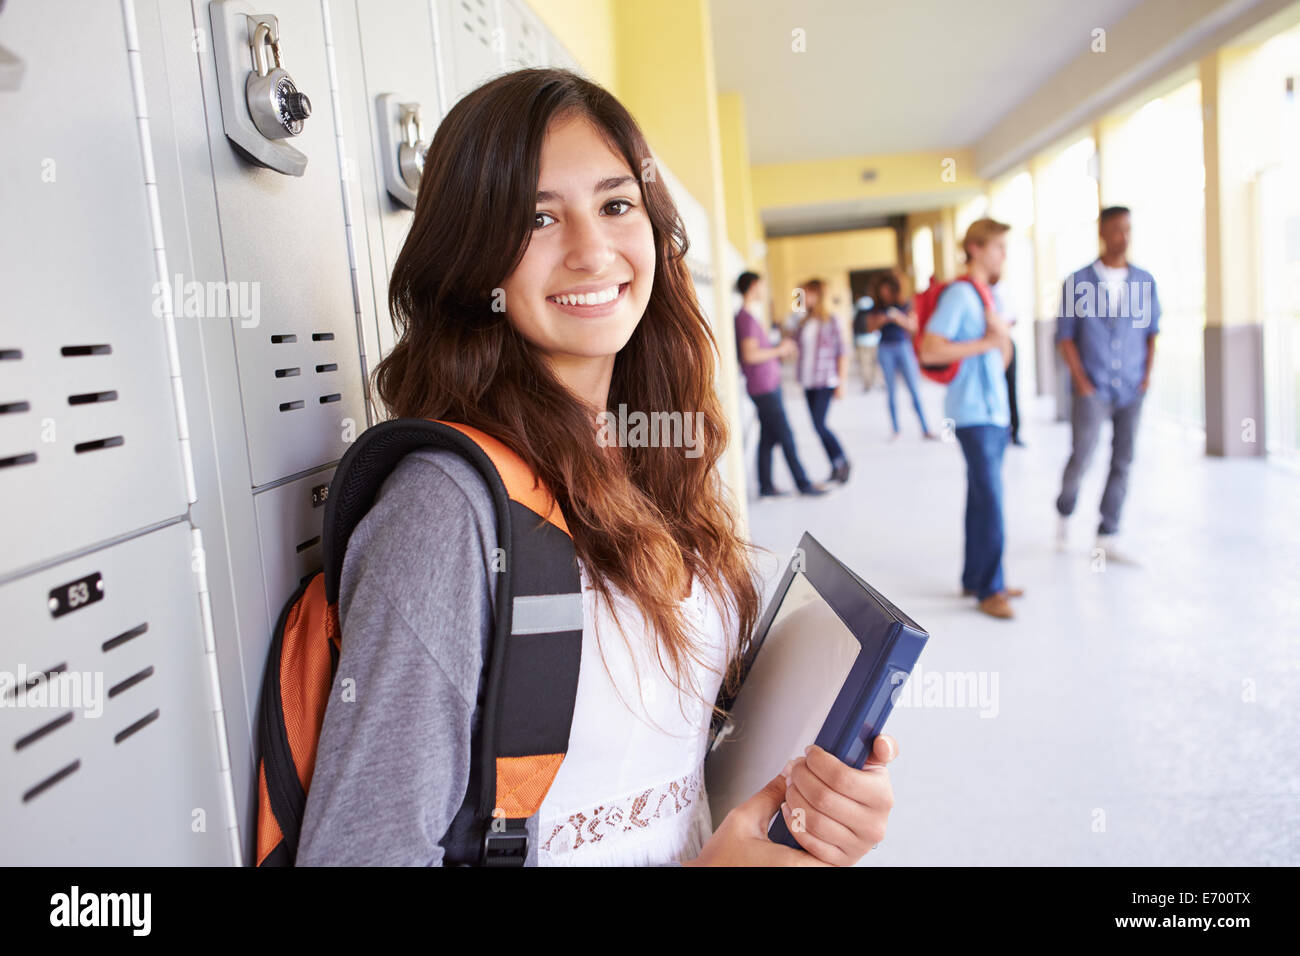 Female High School Student Standing By Lockers Stock Photo